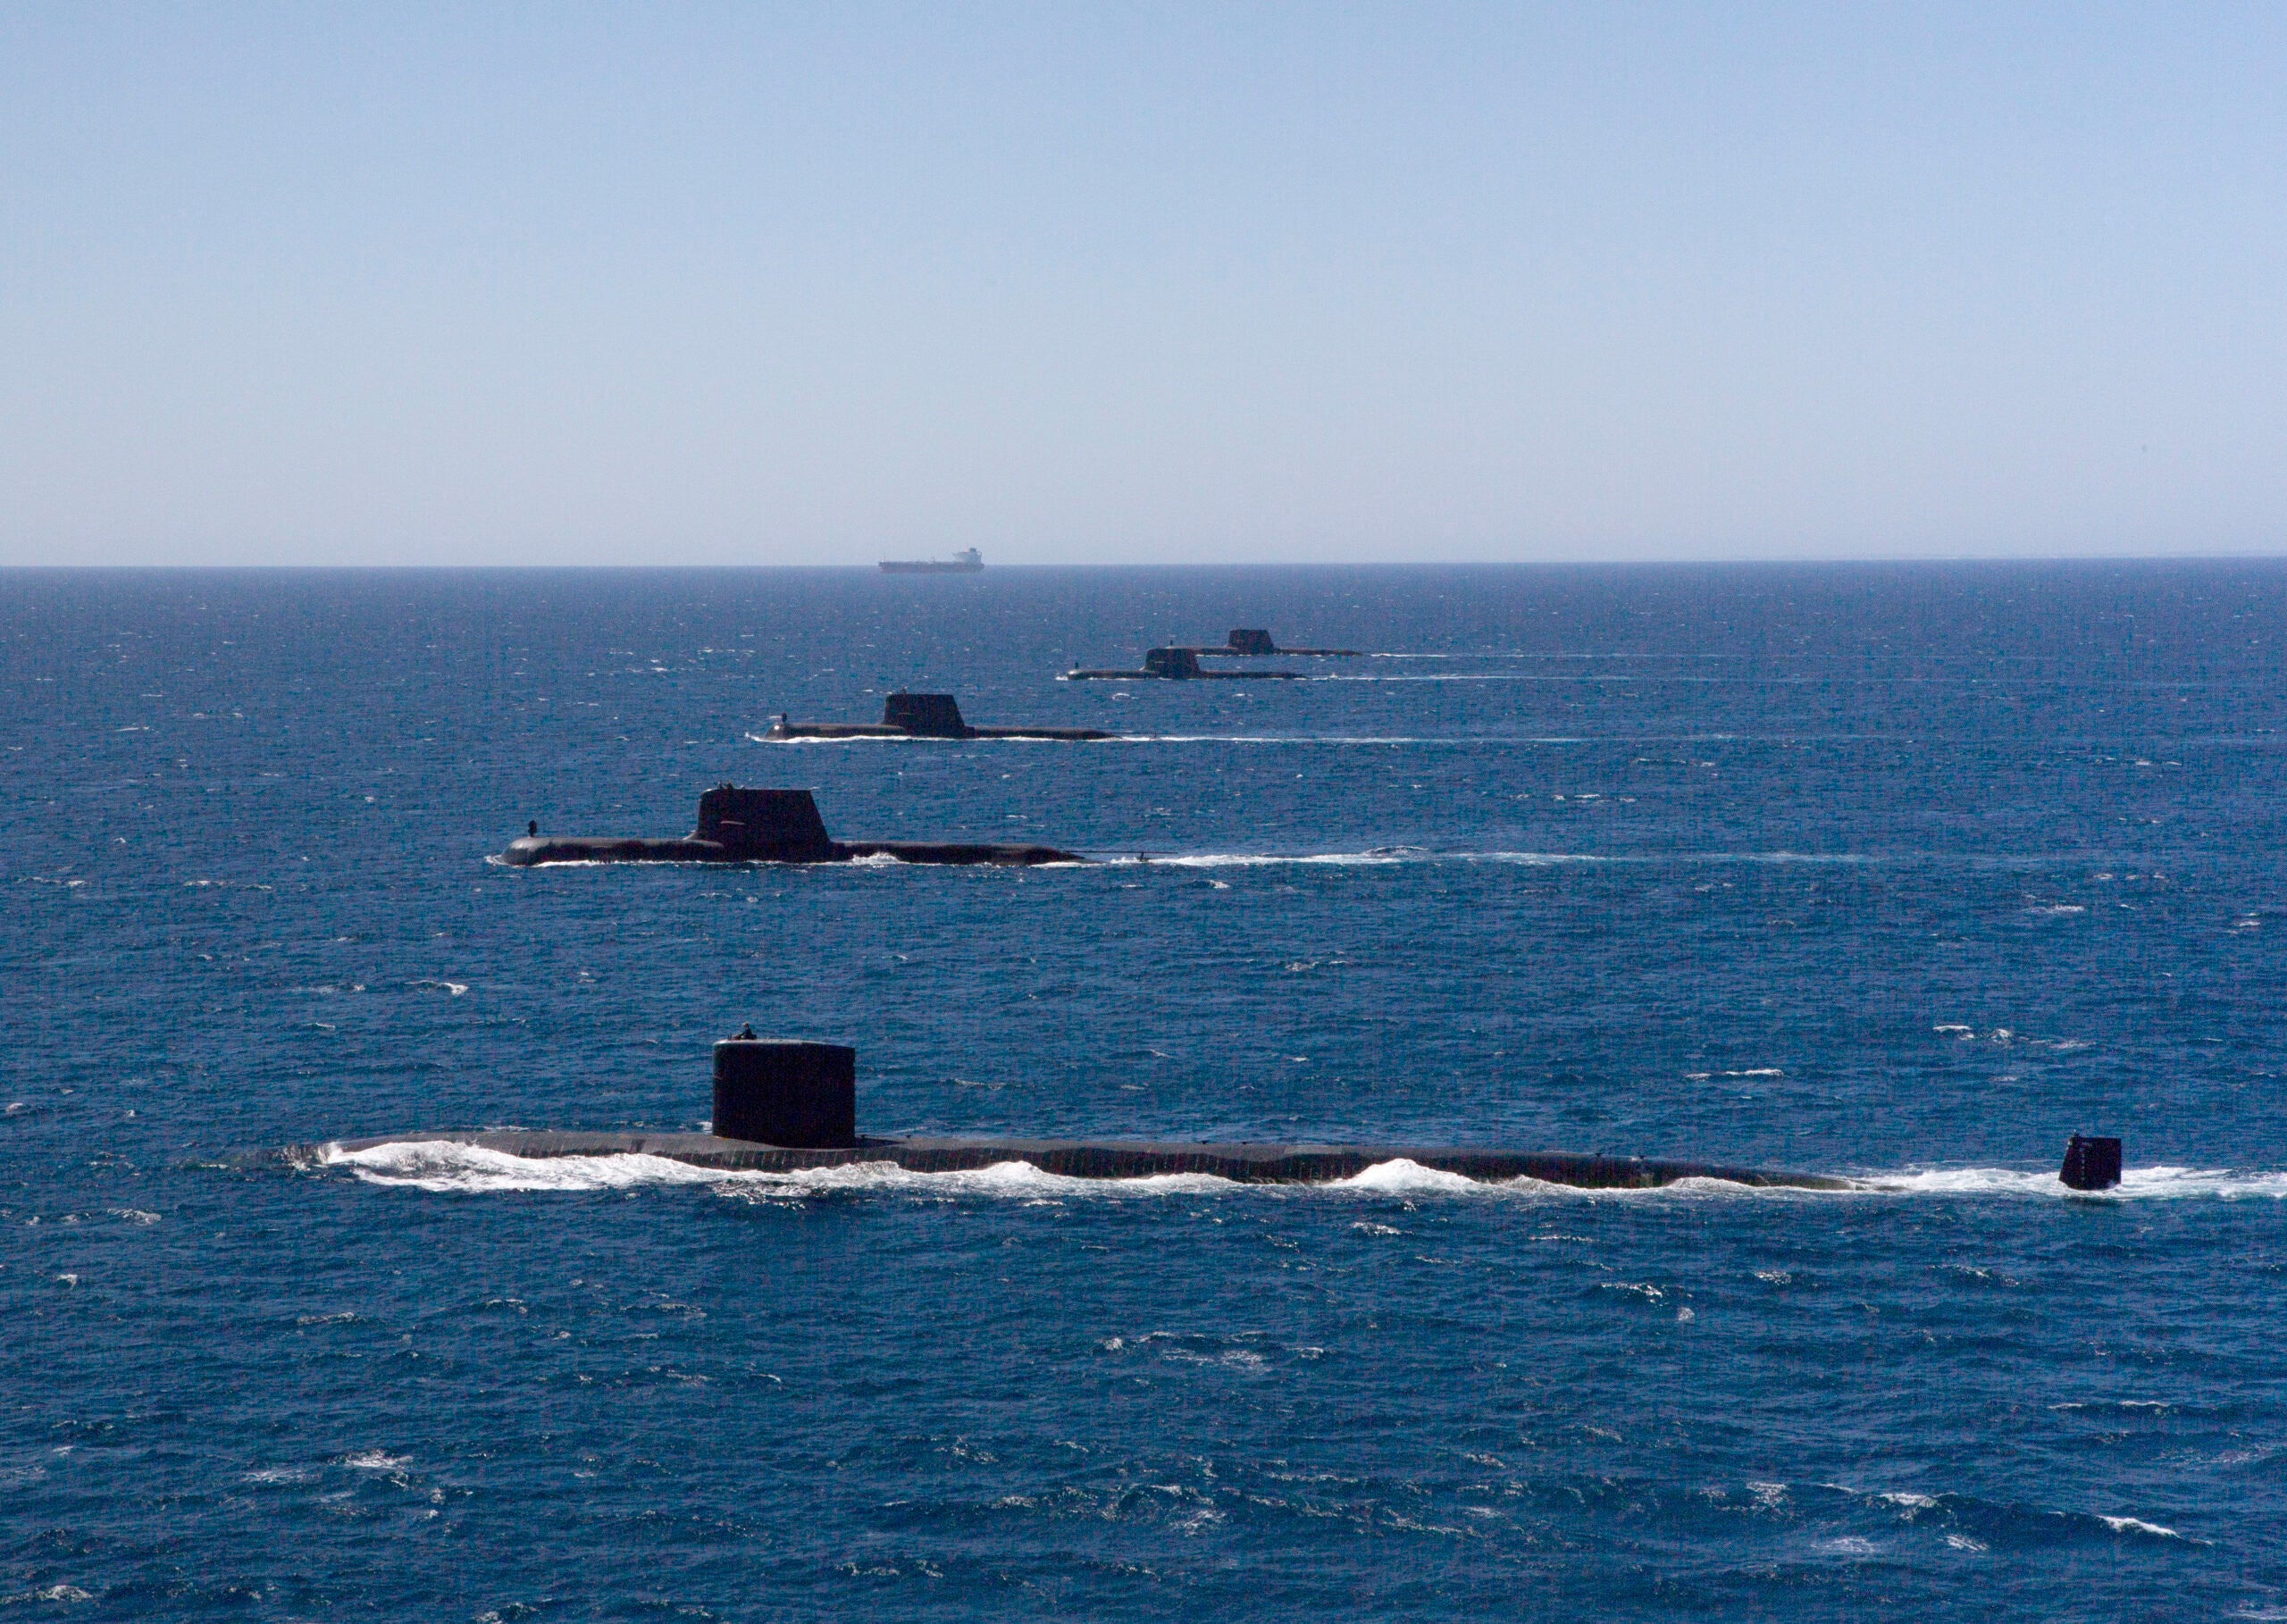 United States Navy Submarine USS Santa Fe transits in formation on the surface with Royal Australian Navy Collins Class Submarines HMAS Collins, HMAS Farncomb, HMAS Dechaineux and HMAS Sheean in the West Australian Exercise Area. *** Local Caption *** Royal Australian Navy Collins Class Submarines HMAS Collins, HMAS Farncomb, HMAS Dechaineux and HMAS Sheean were joined in formation by United States Navy Submarine USS Santa Fe in the West Australian Exercise Area for a photo opportunity in February 2019. The submarines were in the area to participate in several activities, including Exercise Lungfish 2019 and Exercise Ocean Explorer 2019.